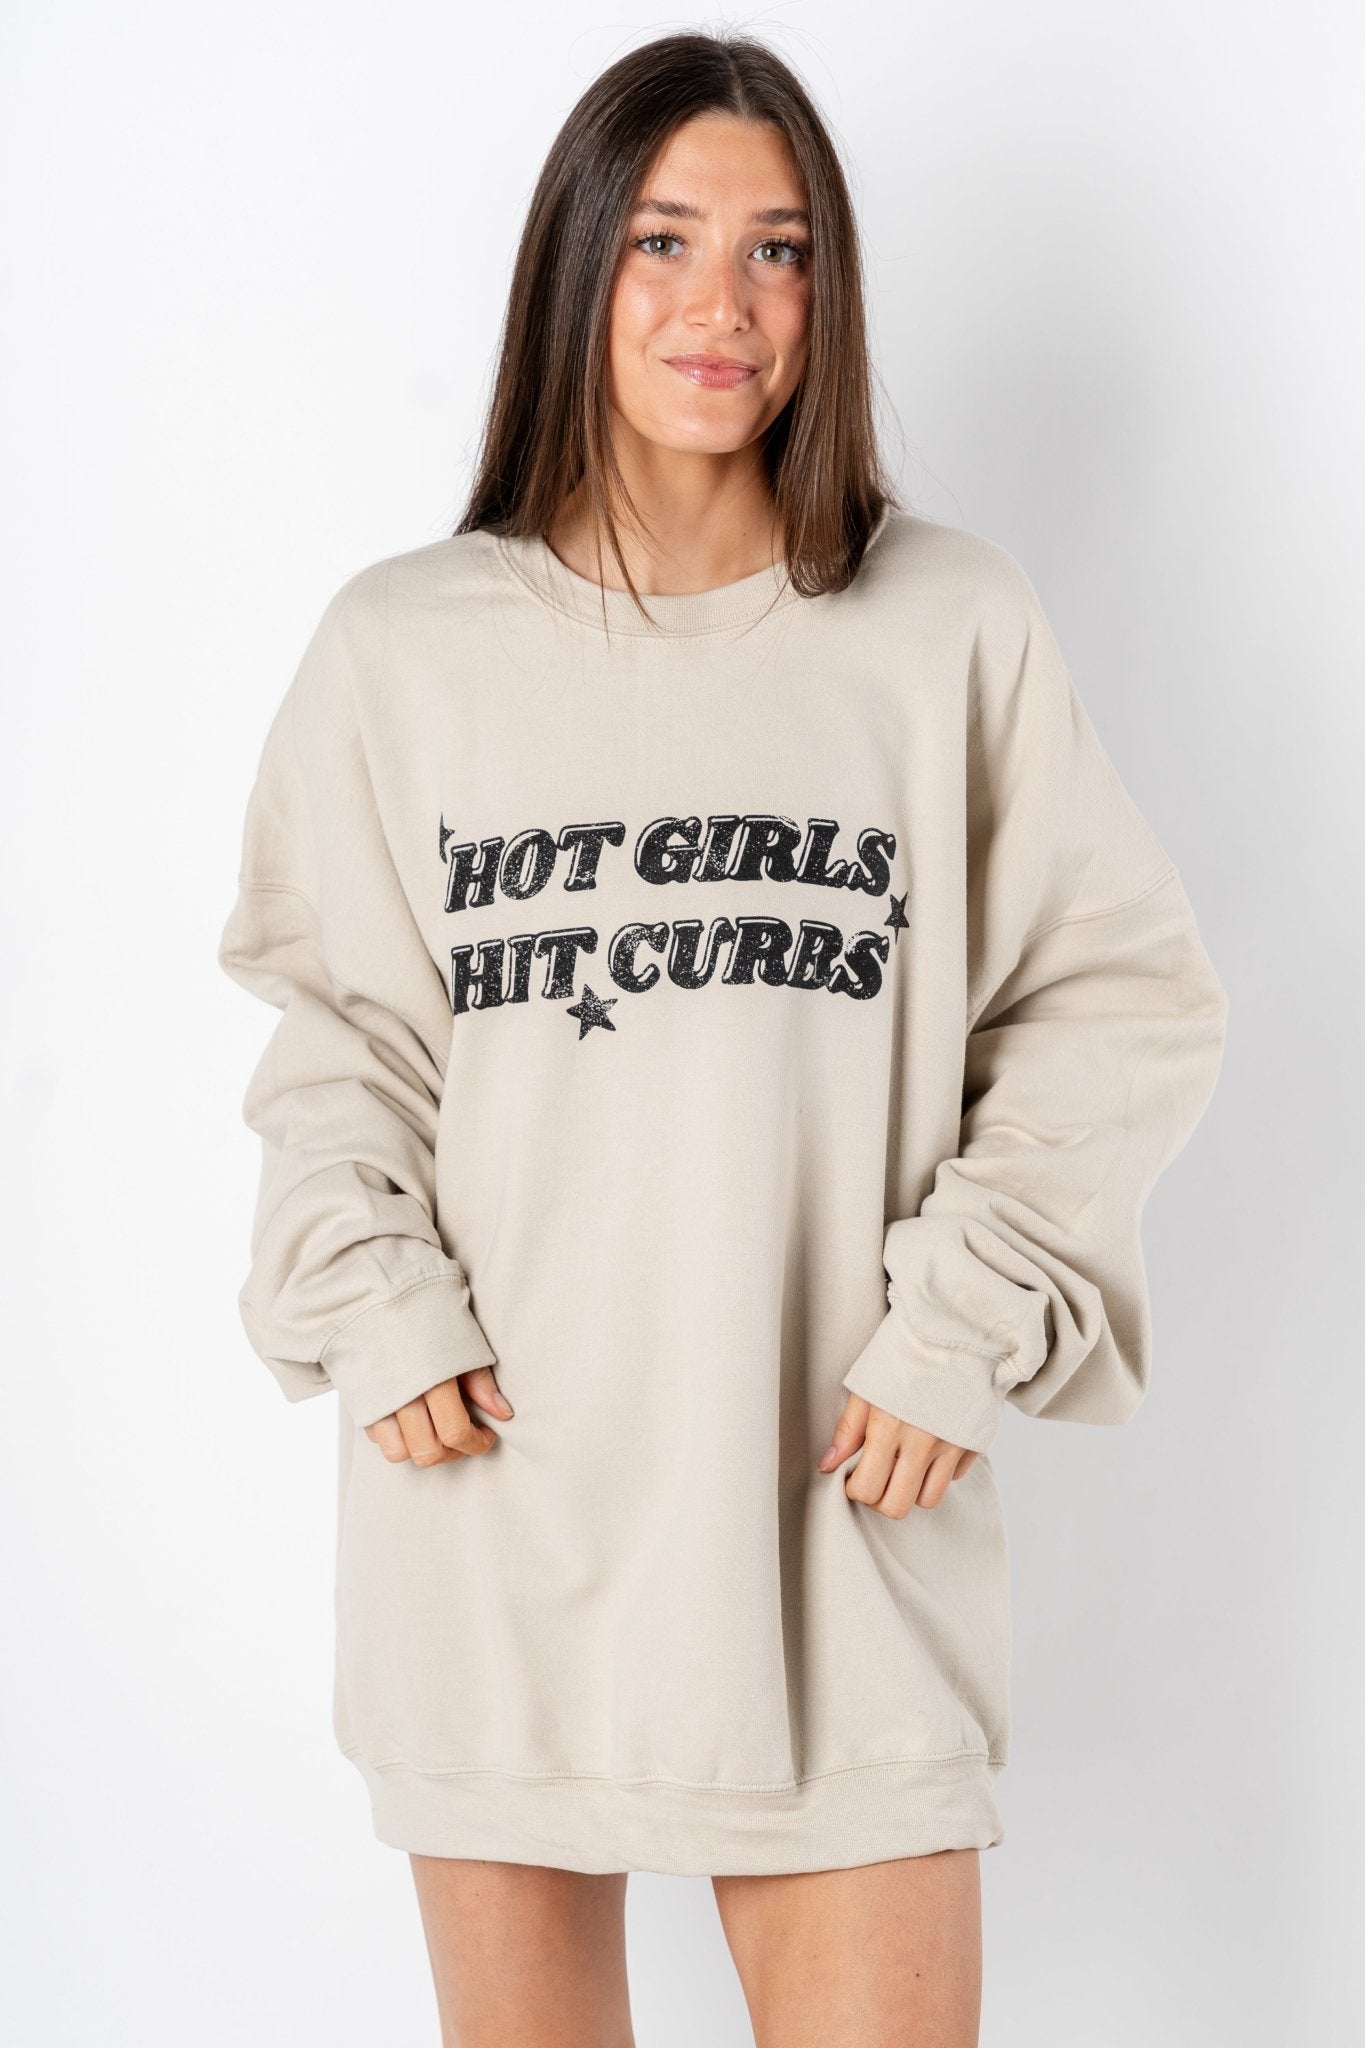 Hot girls hit curbs oversized thrifted sweatshirt sand - Cute T-shirts - Funny T-Shirts at Lush Fashion Lounge Boutique in Oklahoma City